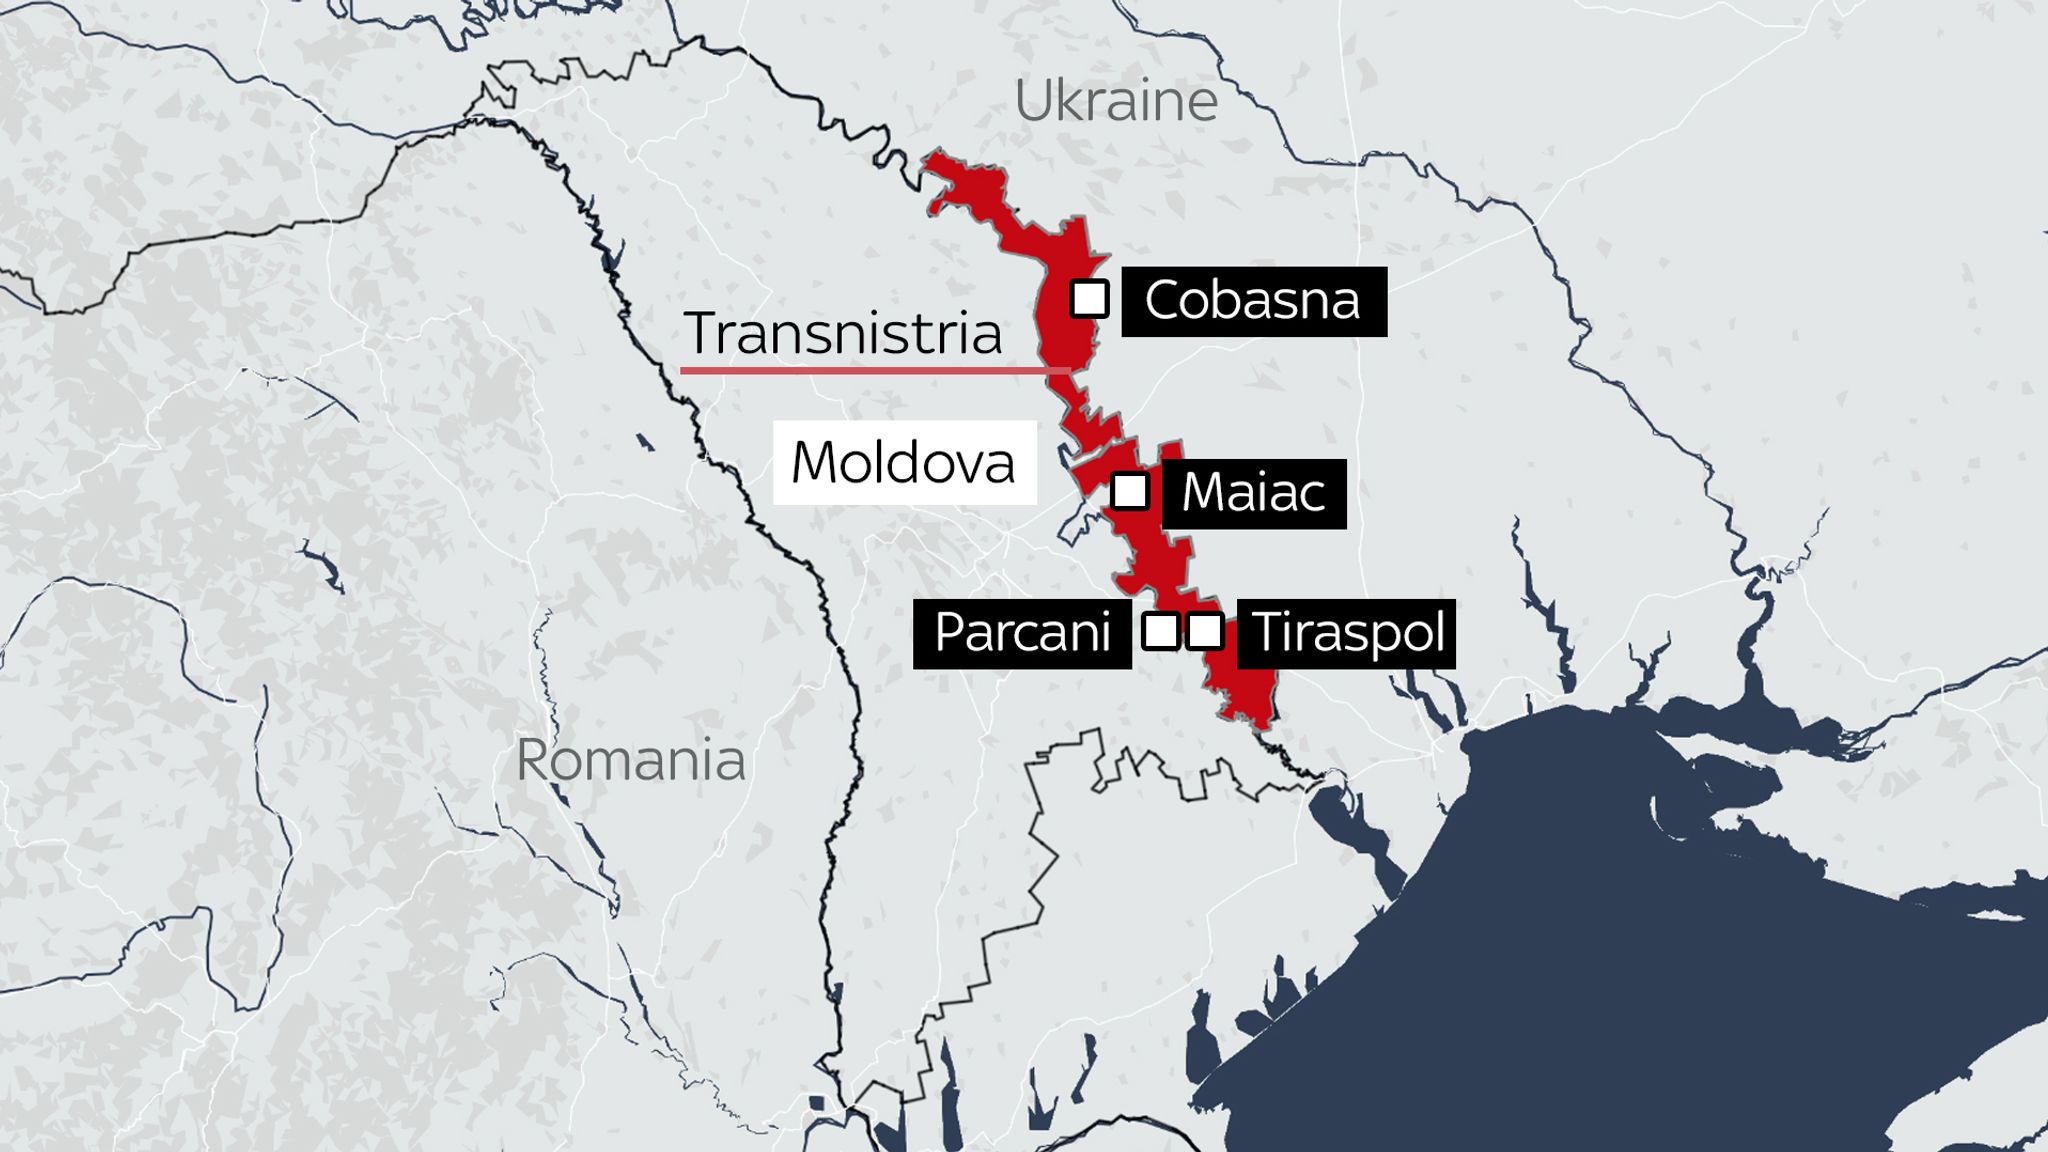 Day 365: Tensions Rise Over Breakaway Region of Transnistria post image